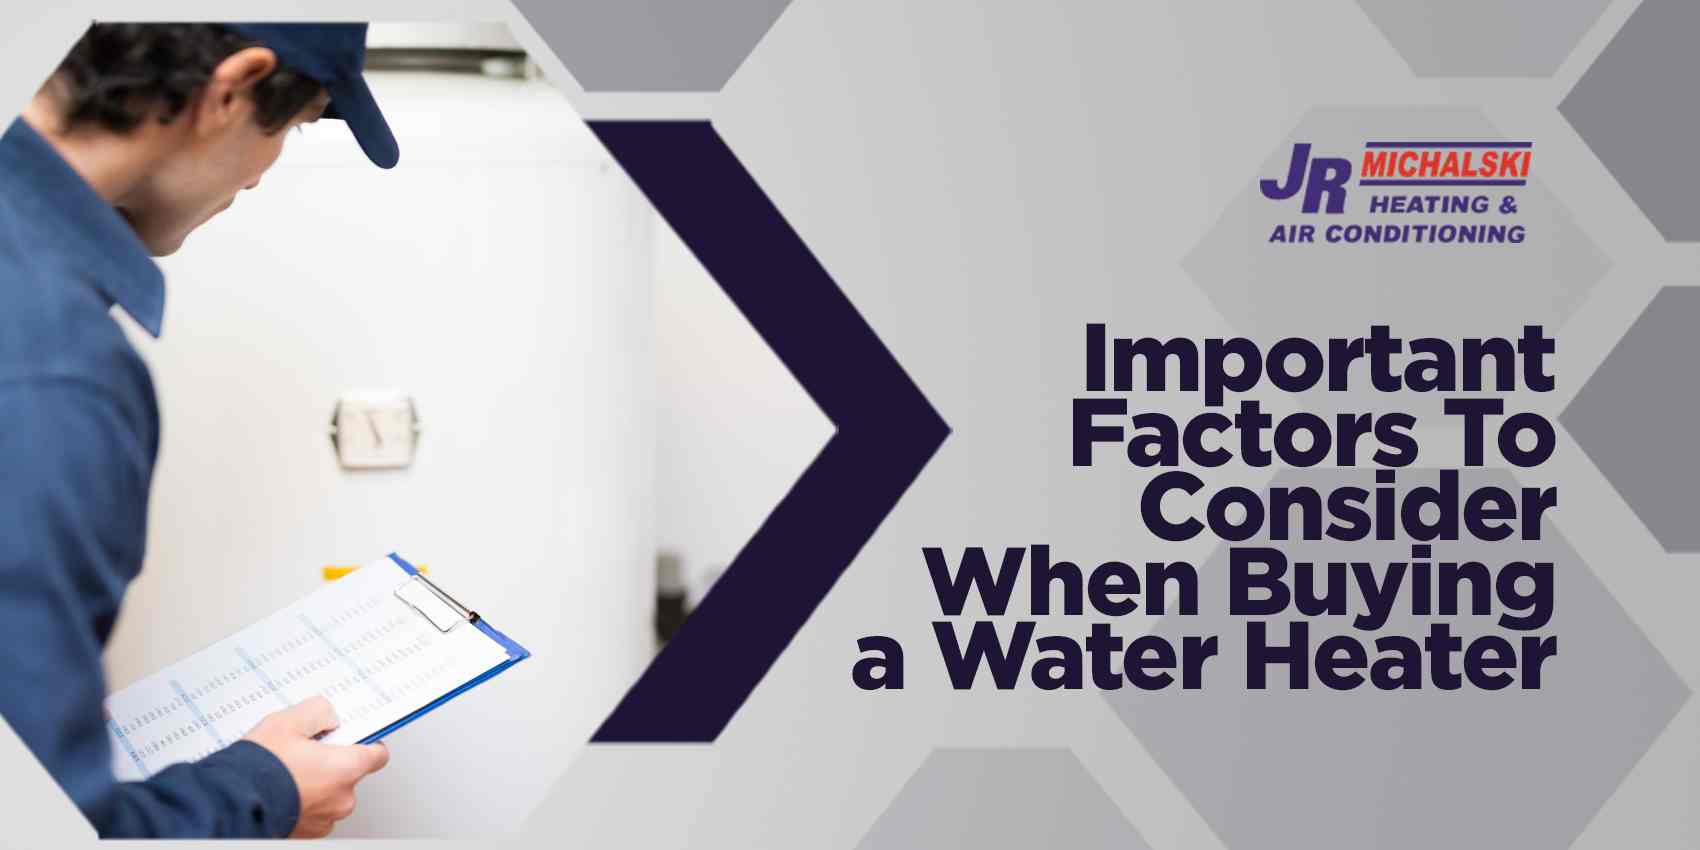 Important Factors To Consider When Buying a Water Heater